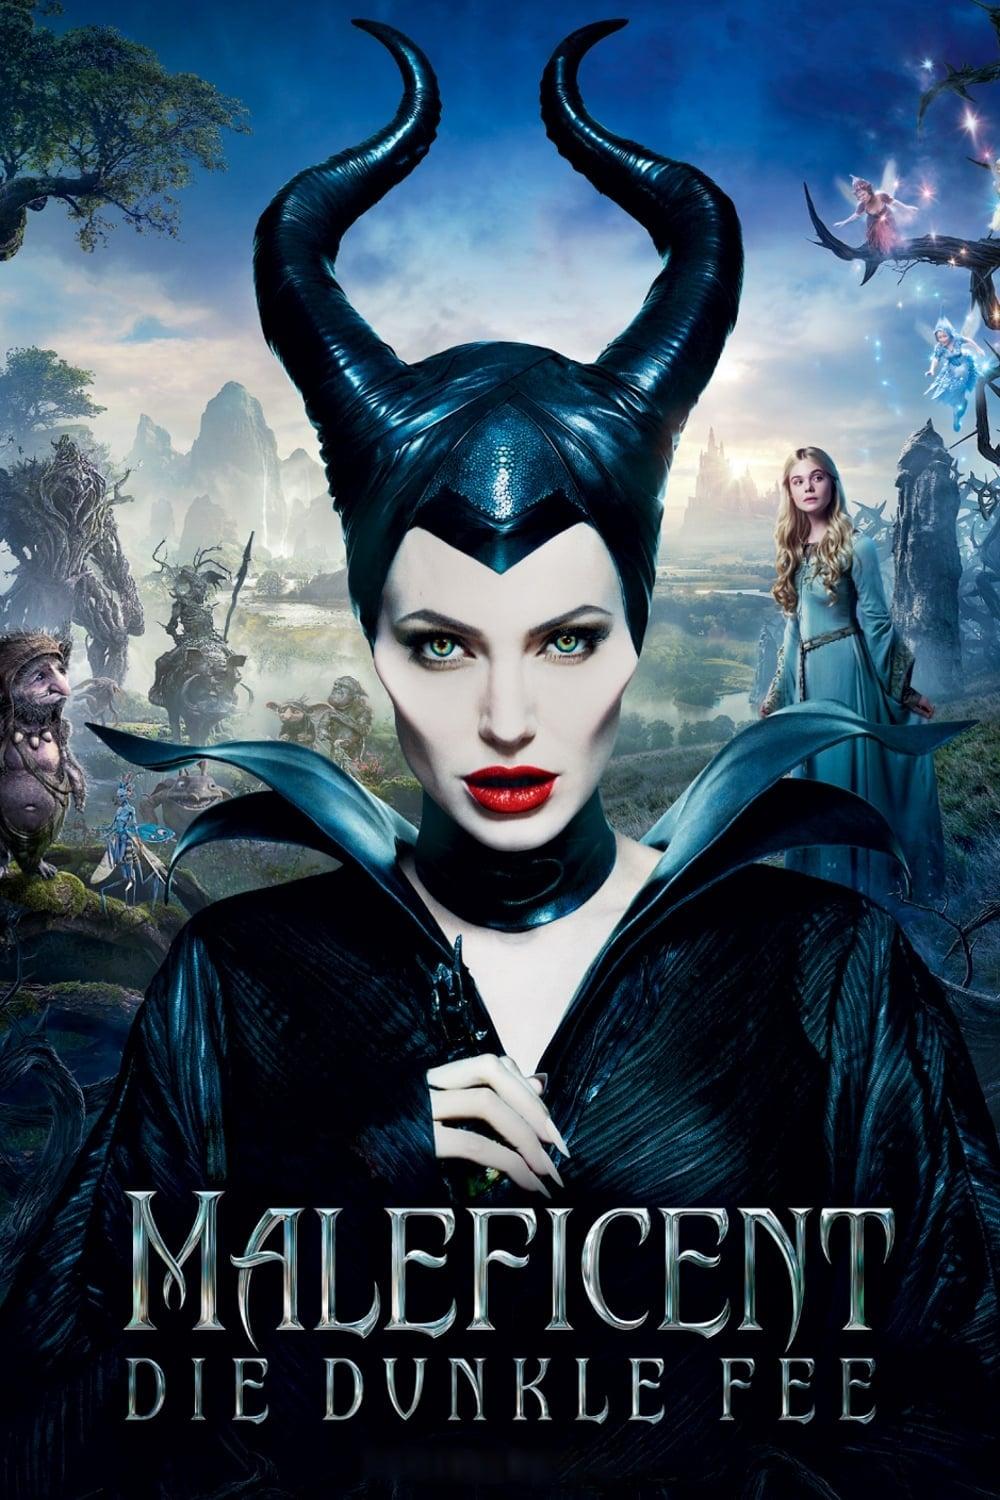 Maleficent - Die dunkle Fee poster